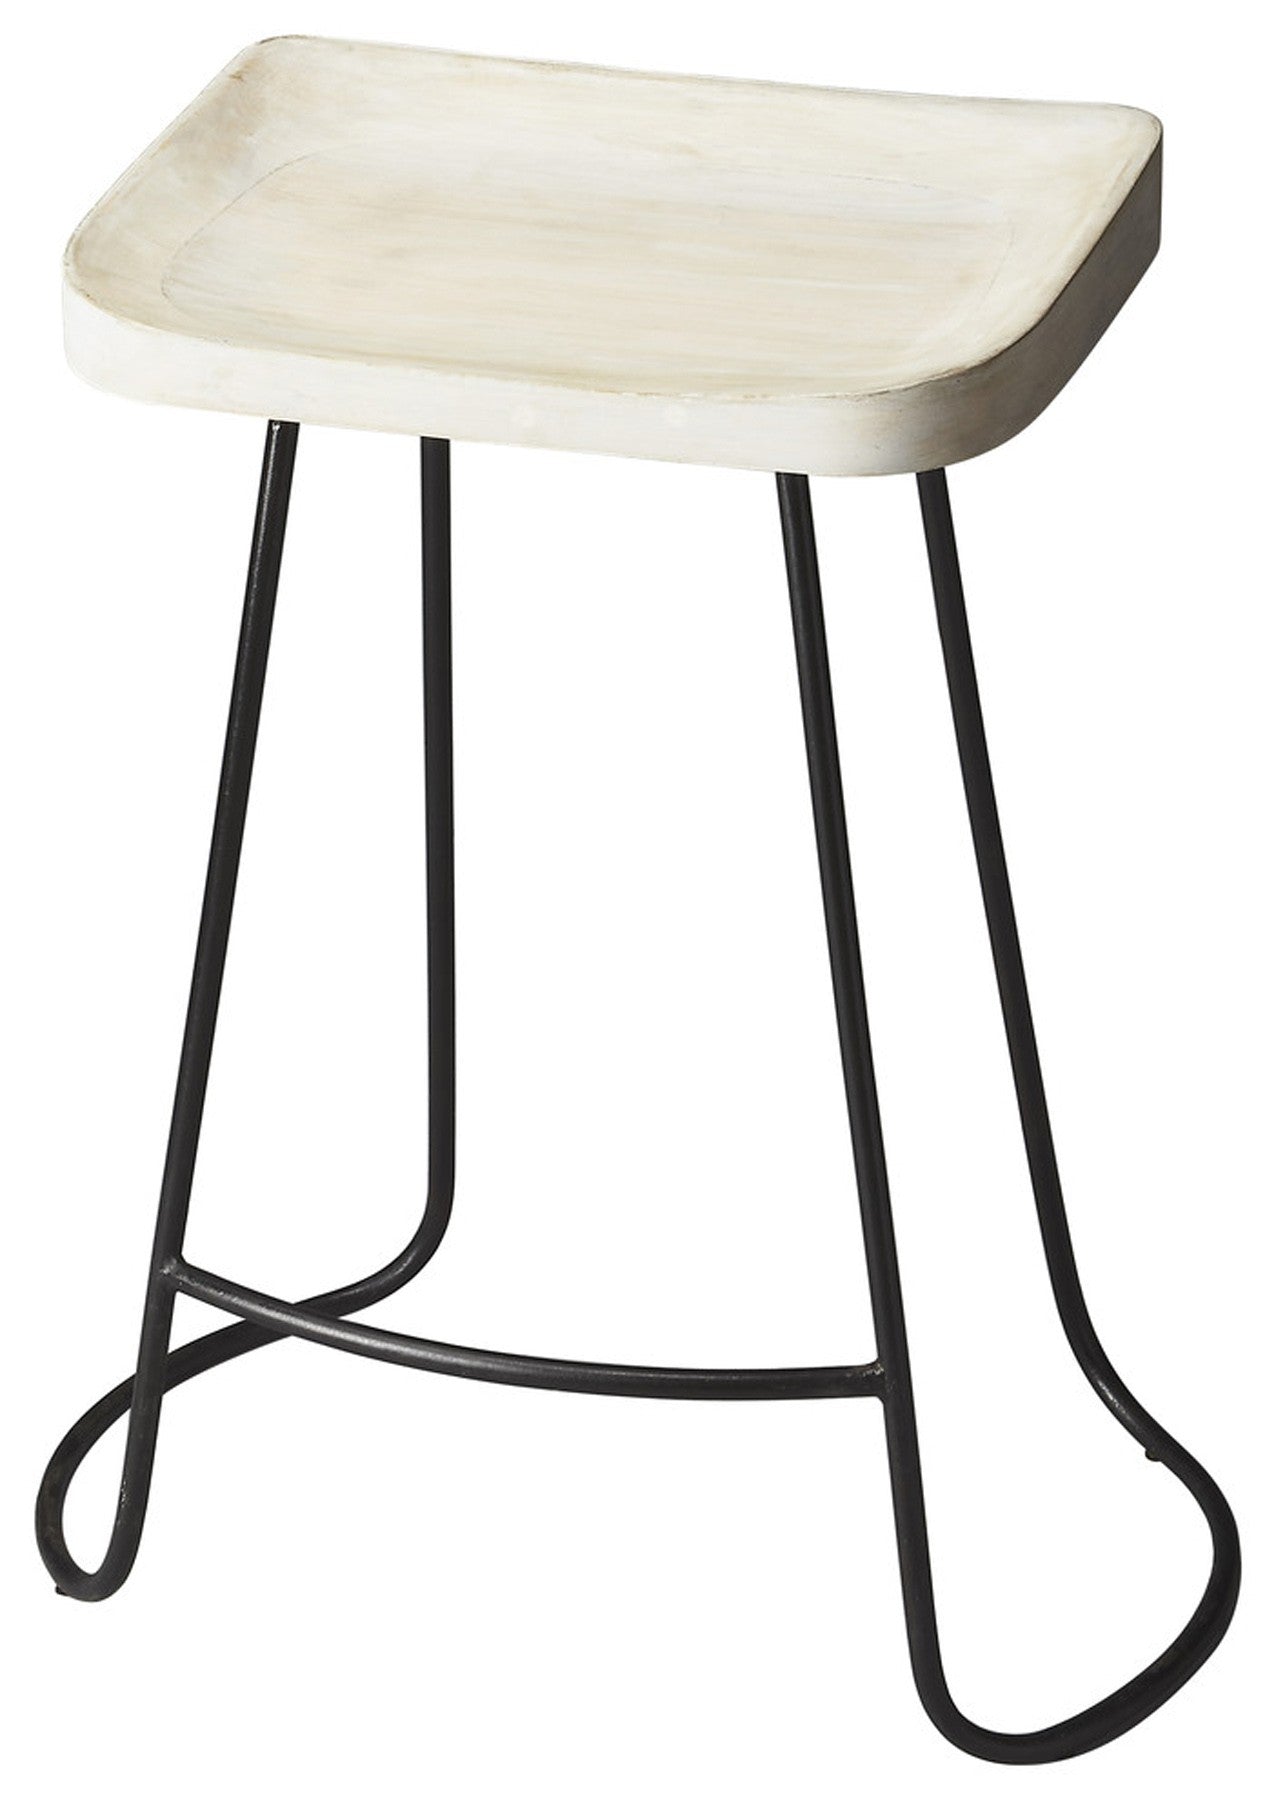 " Off White And Black Iron Backless Counter Height Bar Chair